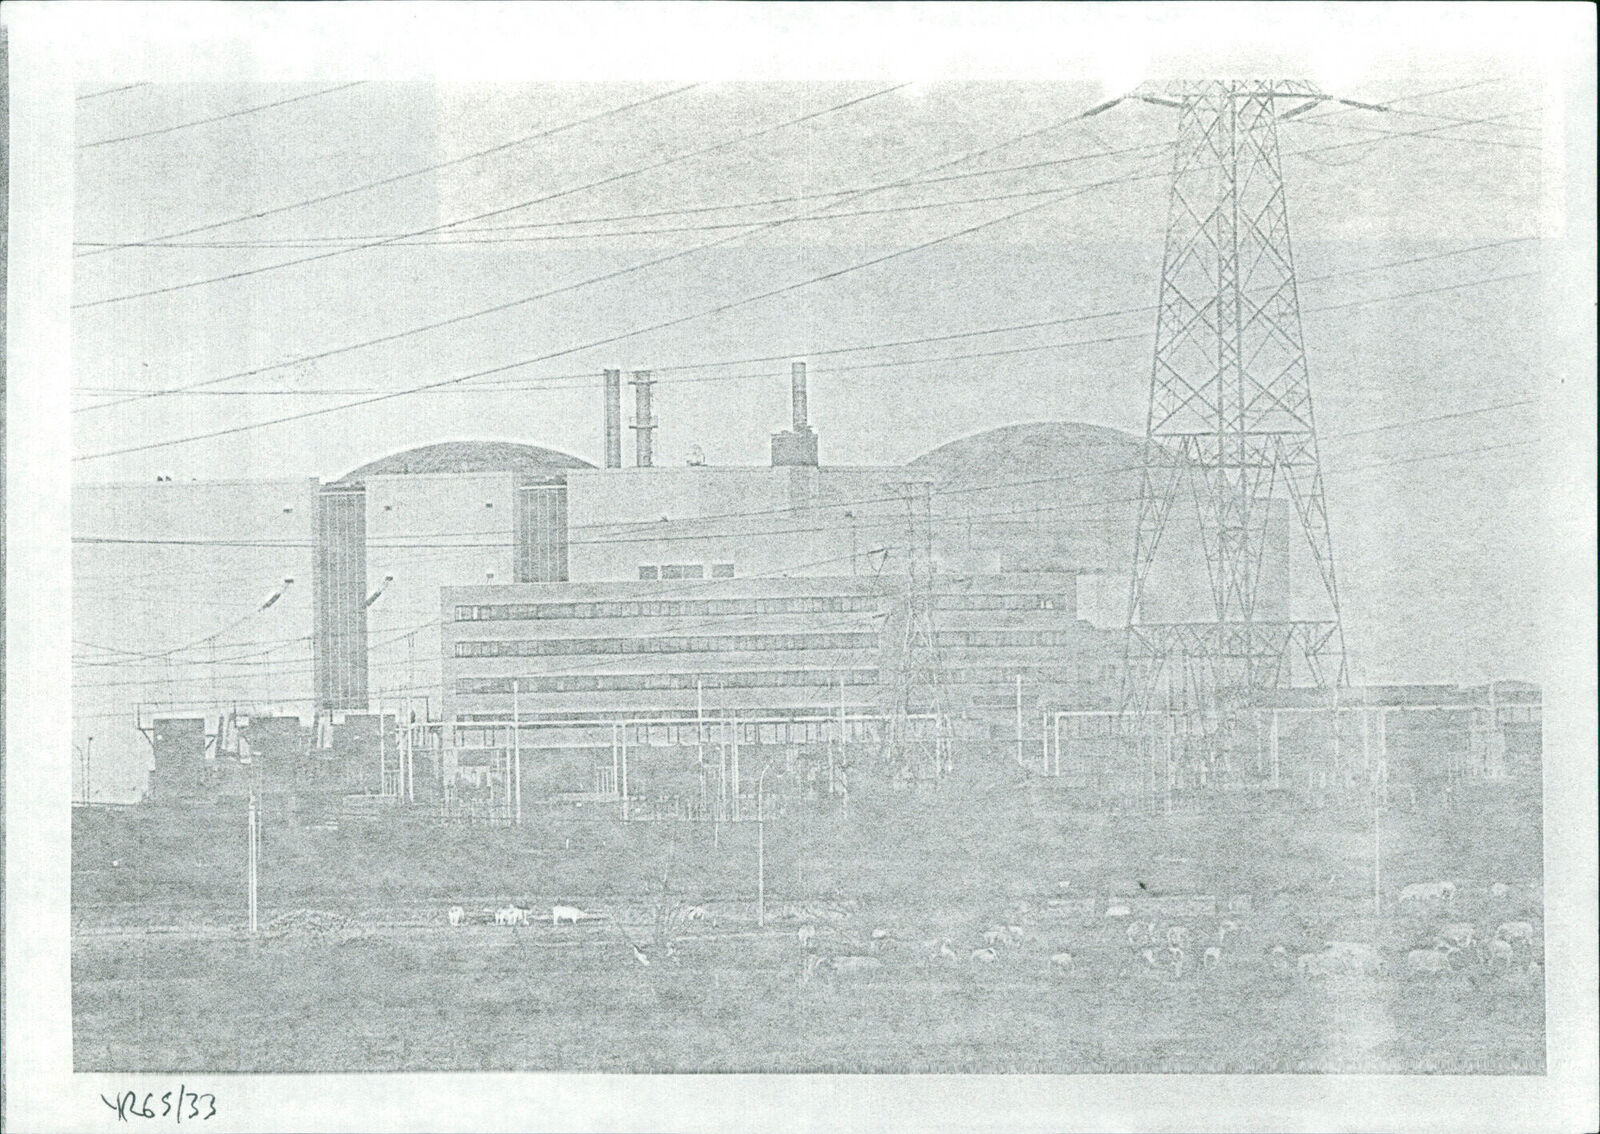 Industrial pollution - Vintage Photograph 2768026